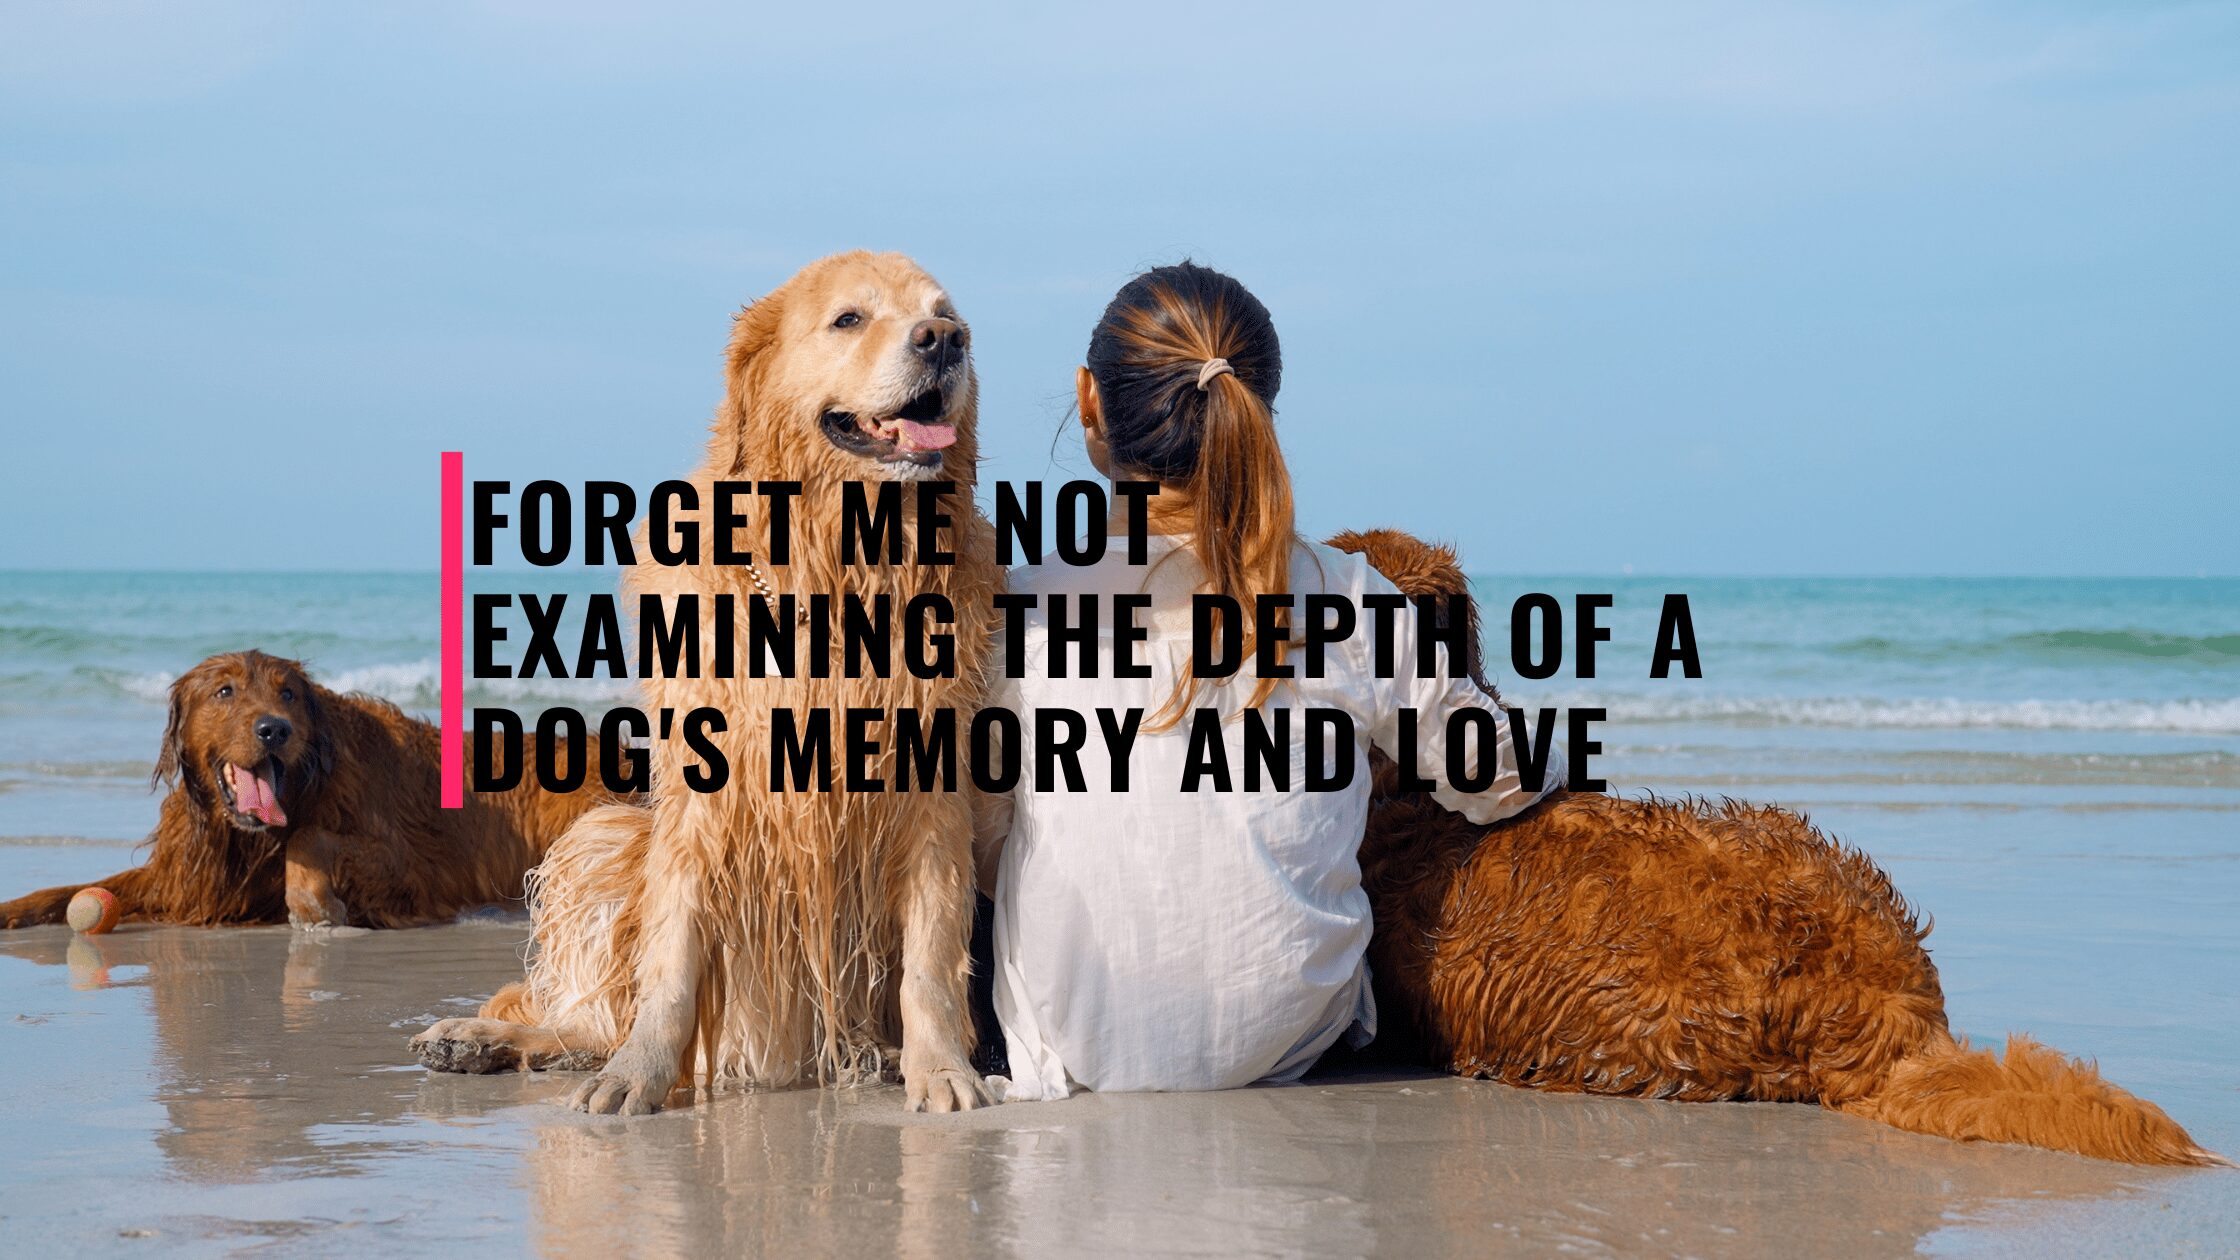 Forget Me Not: Examining the Depth of a Dog's Memory and Love